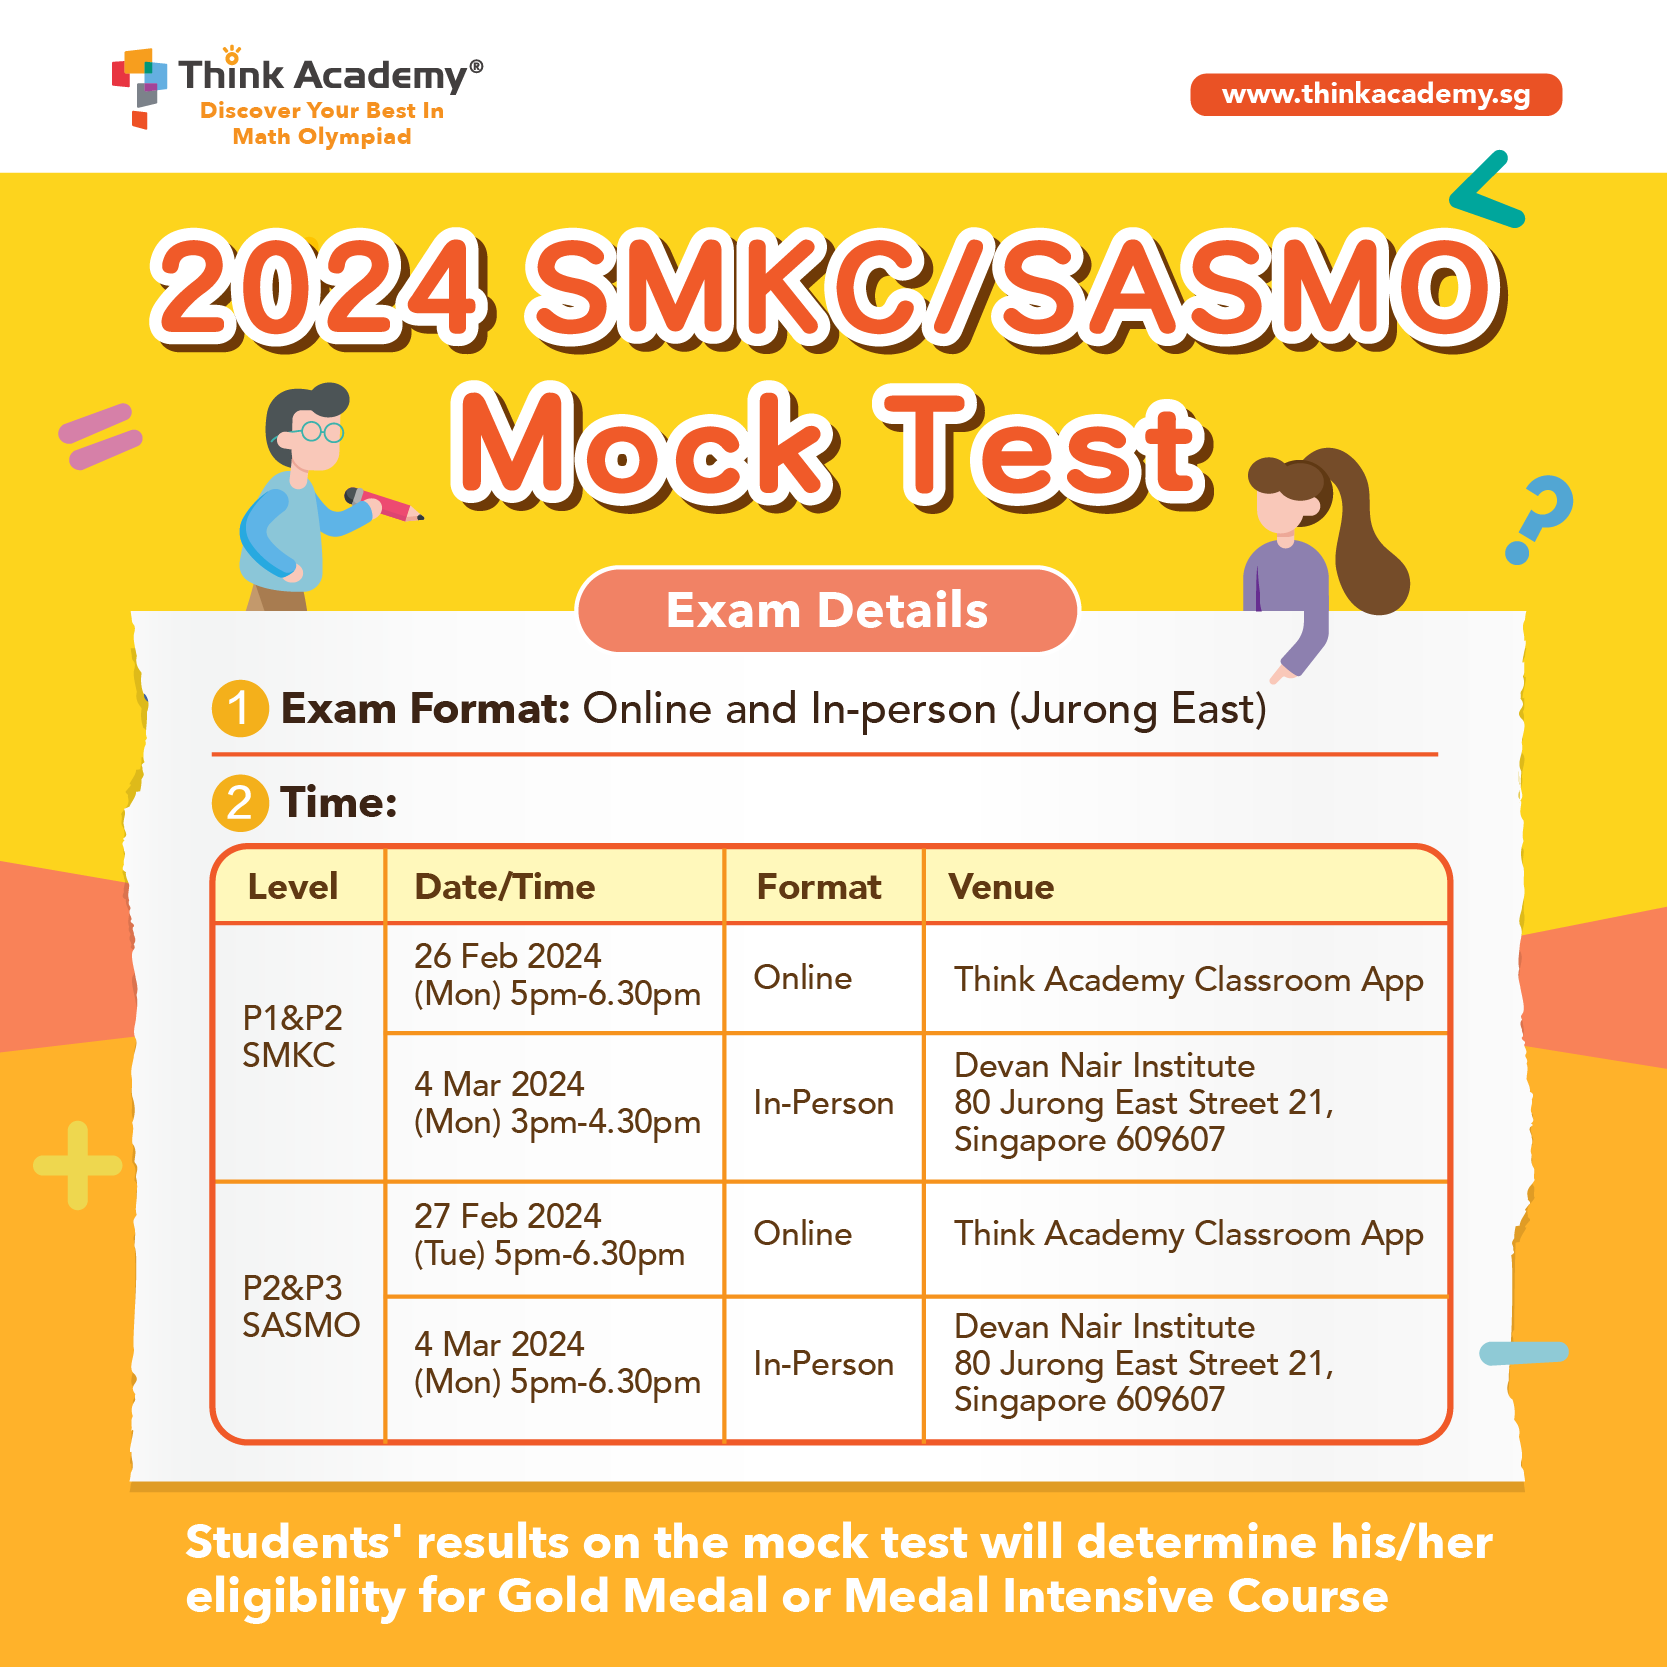 [GROUP BUY] SASMO and SMKC Gold Medal Course Mock Test (P1-P3) for $5